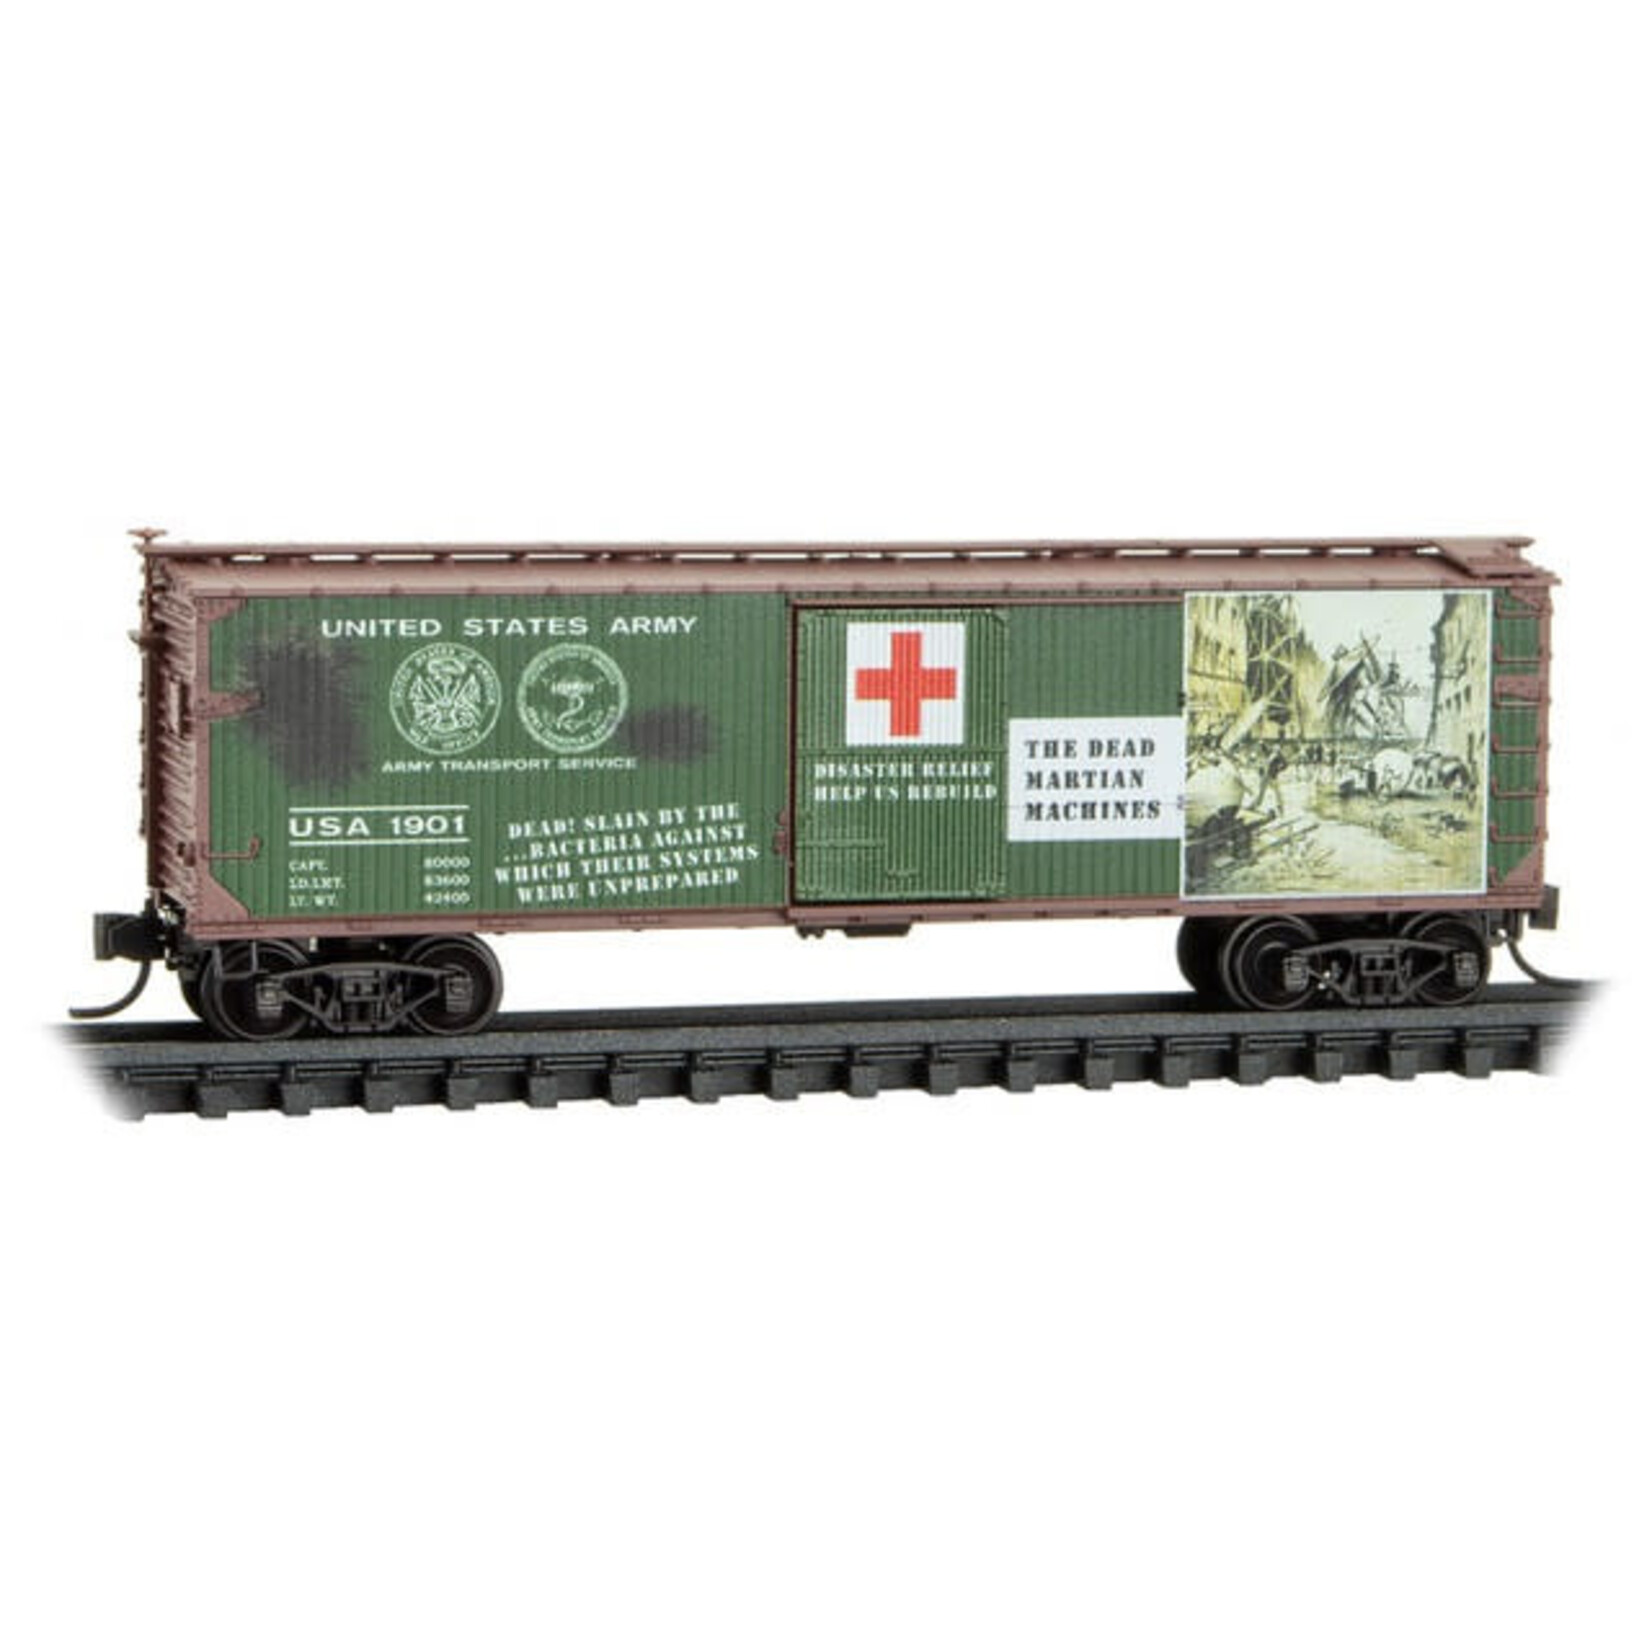 Micro Trains Line 03900275 N War of the Worlds Car #8 Rd# 1901